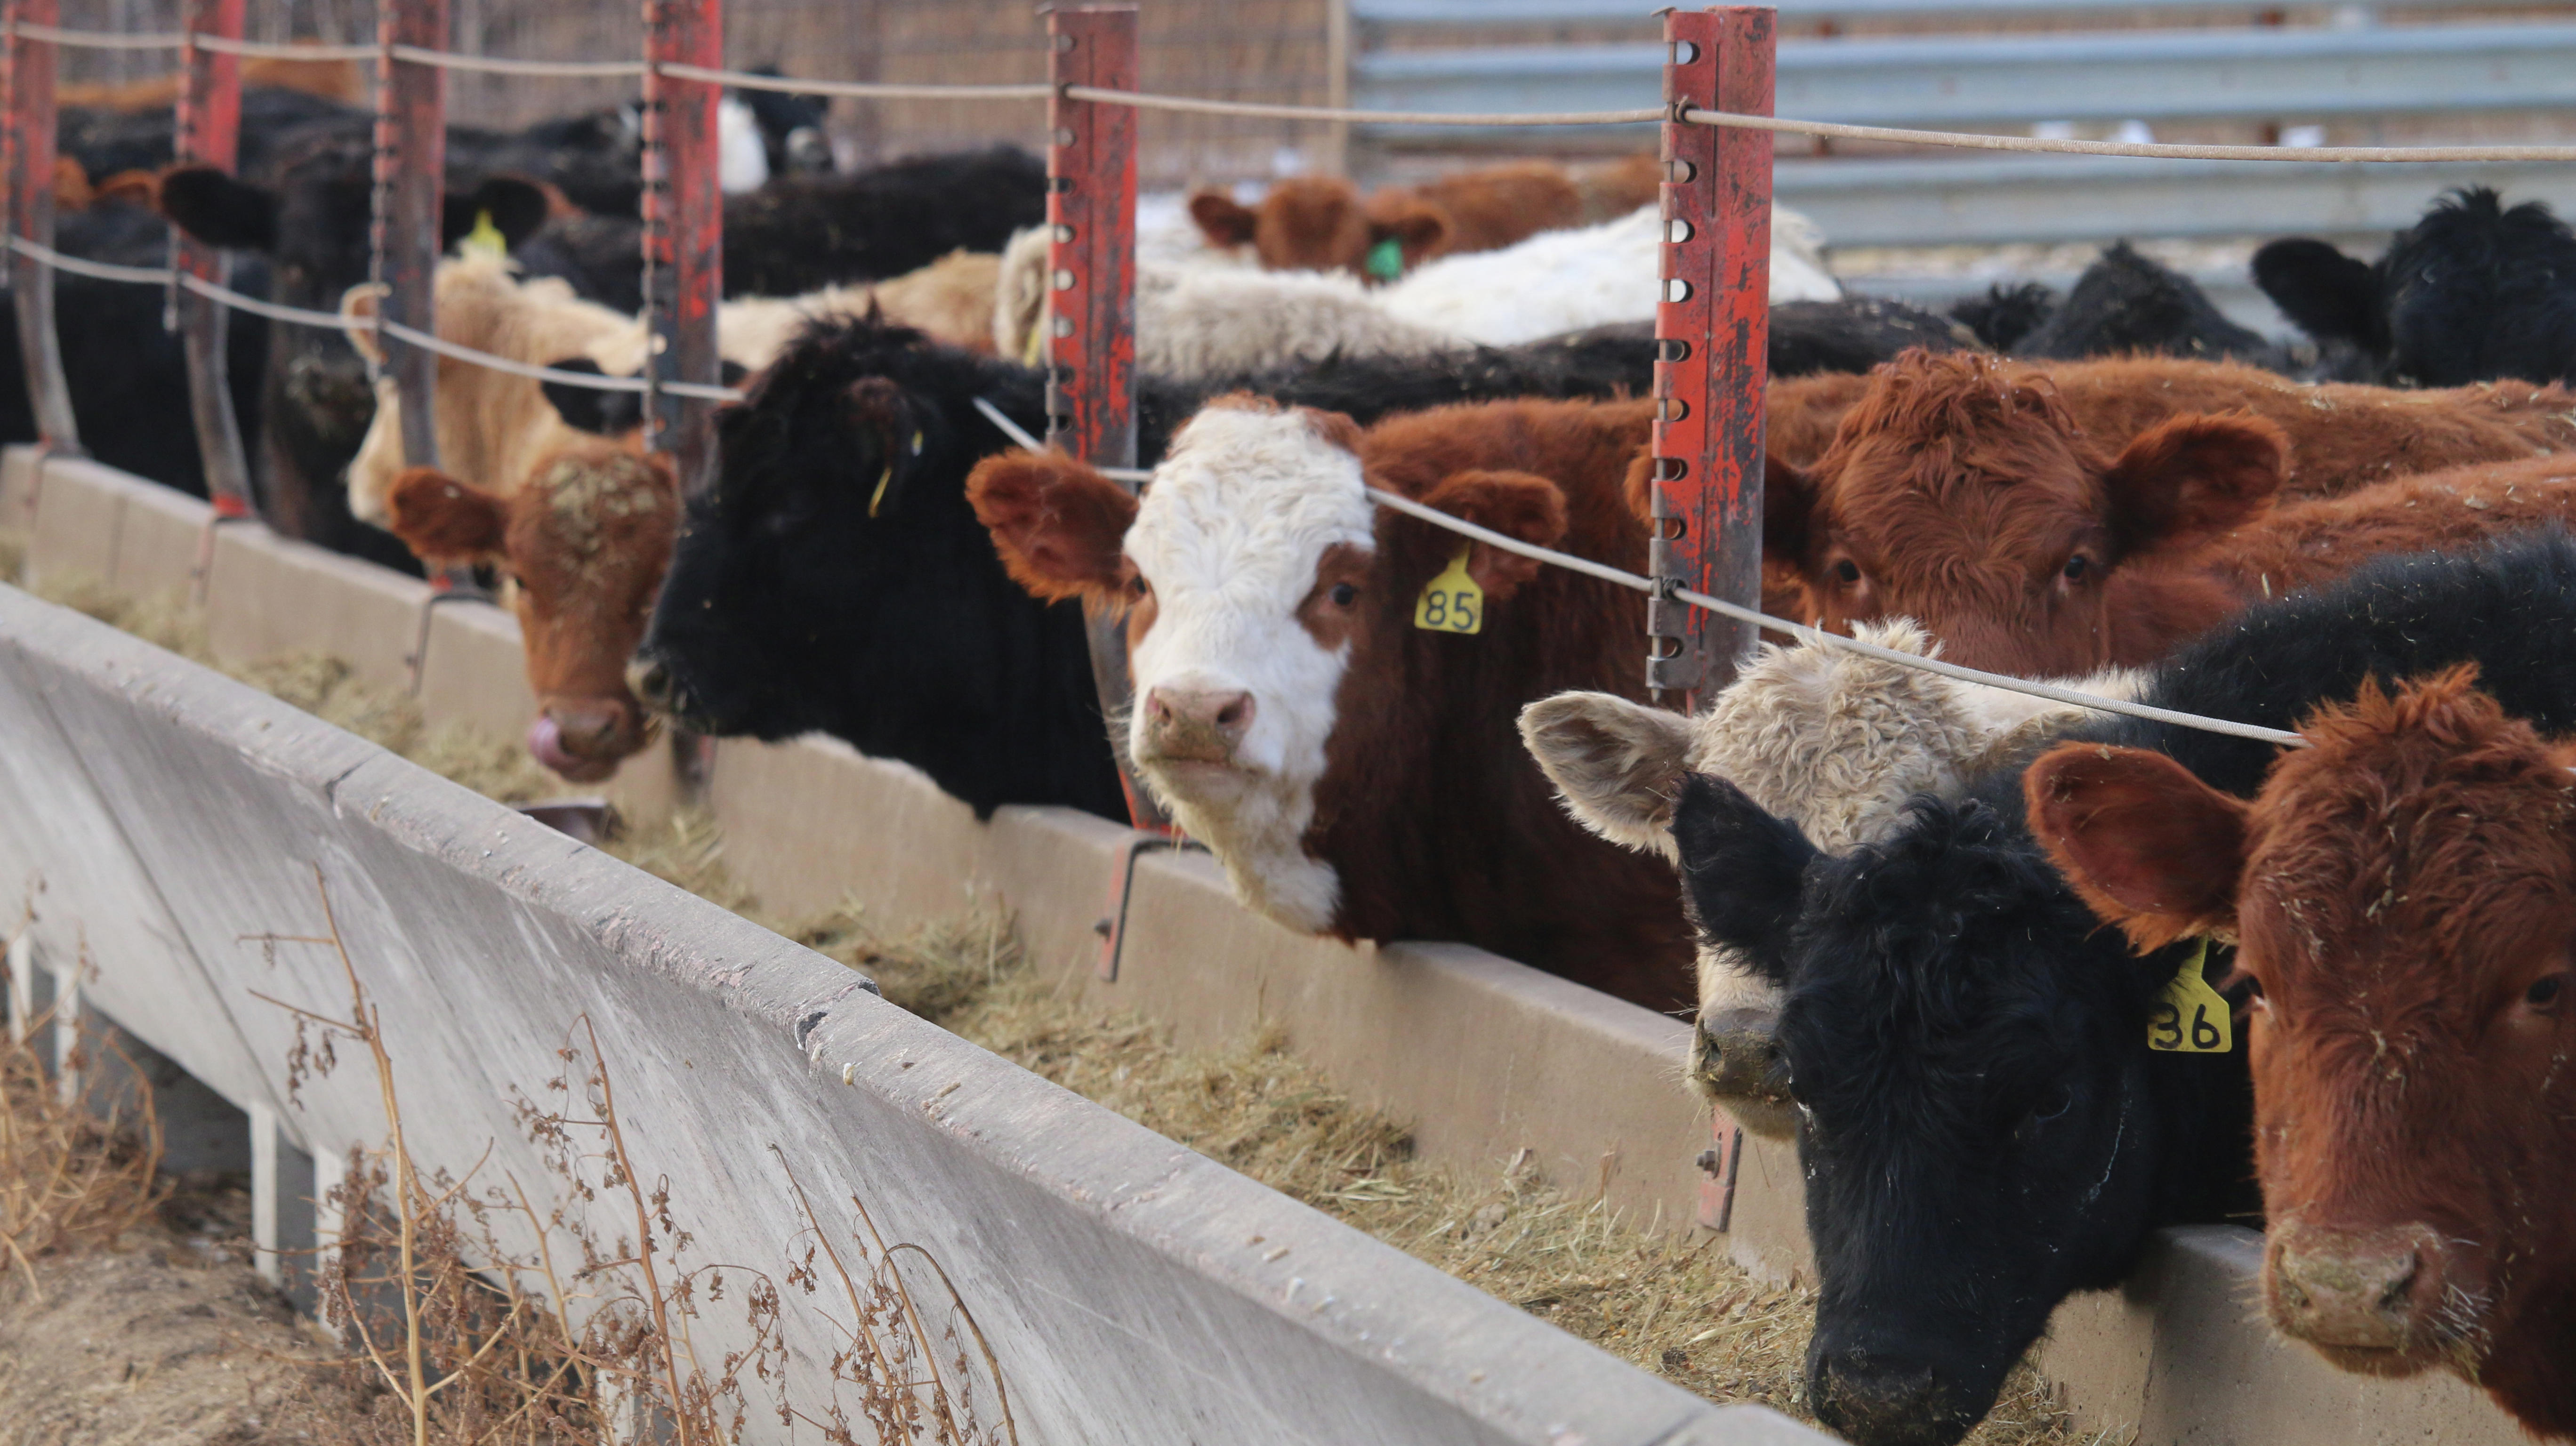 Cold is better than too warm for cattle in the feedlot | Agweek